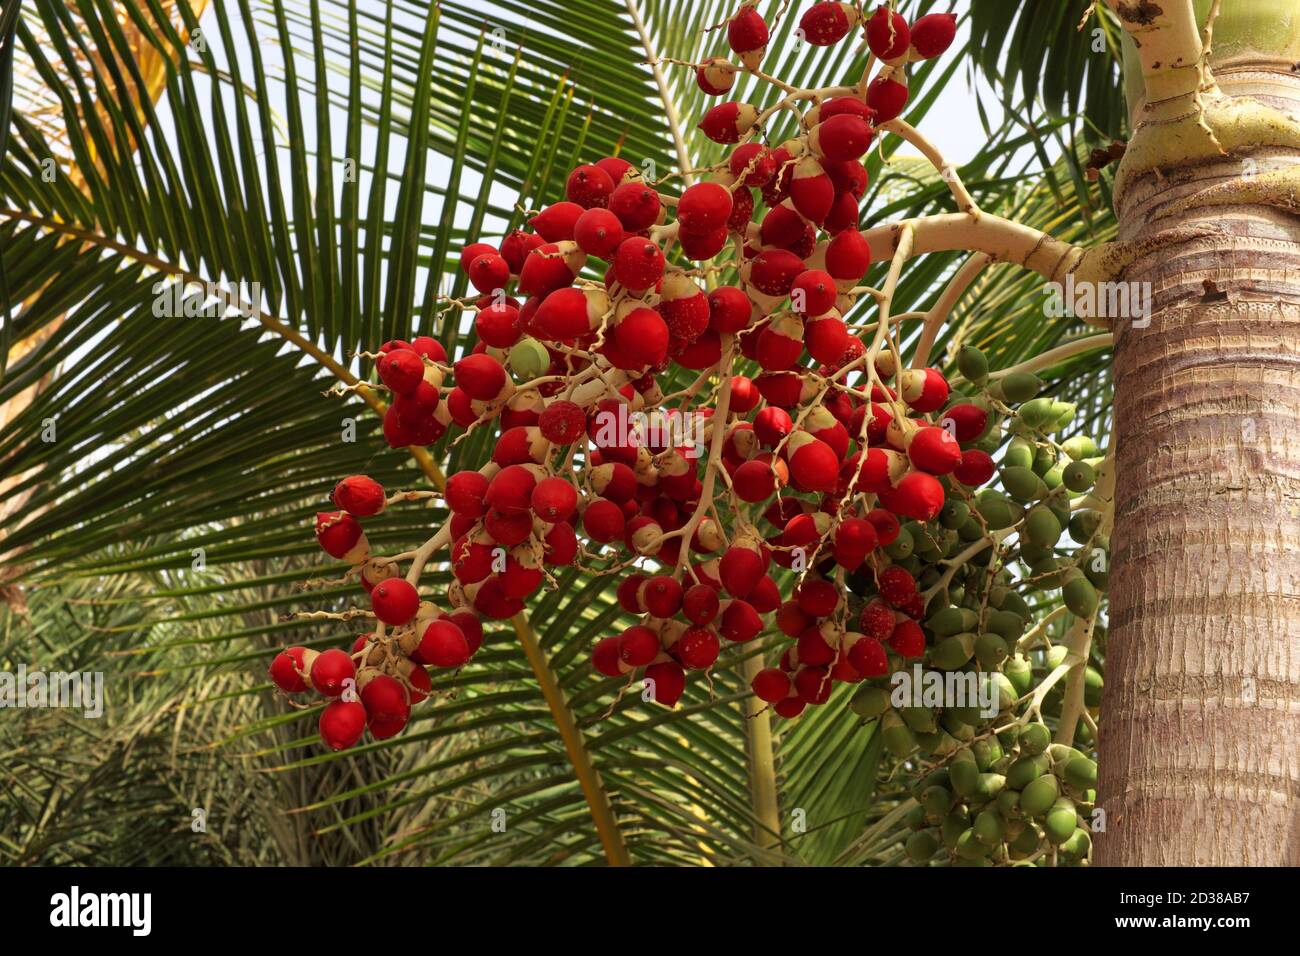 Dates growing in a bunch on adate palm tree Stock Photo